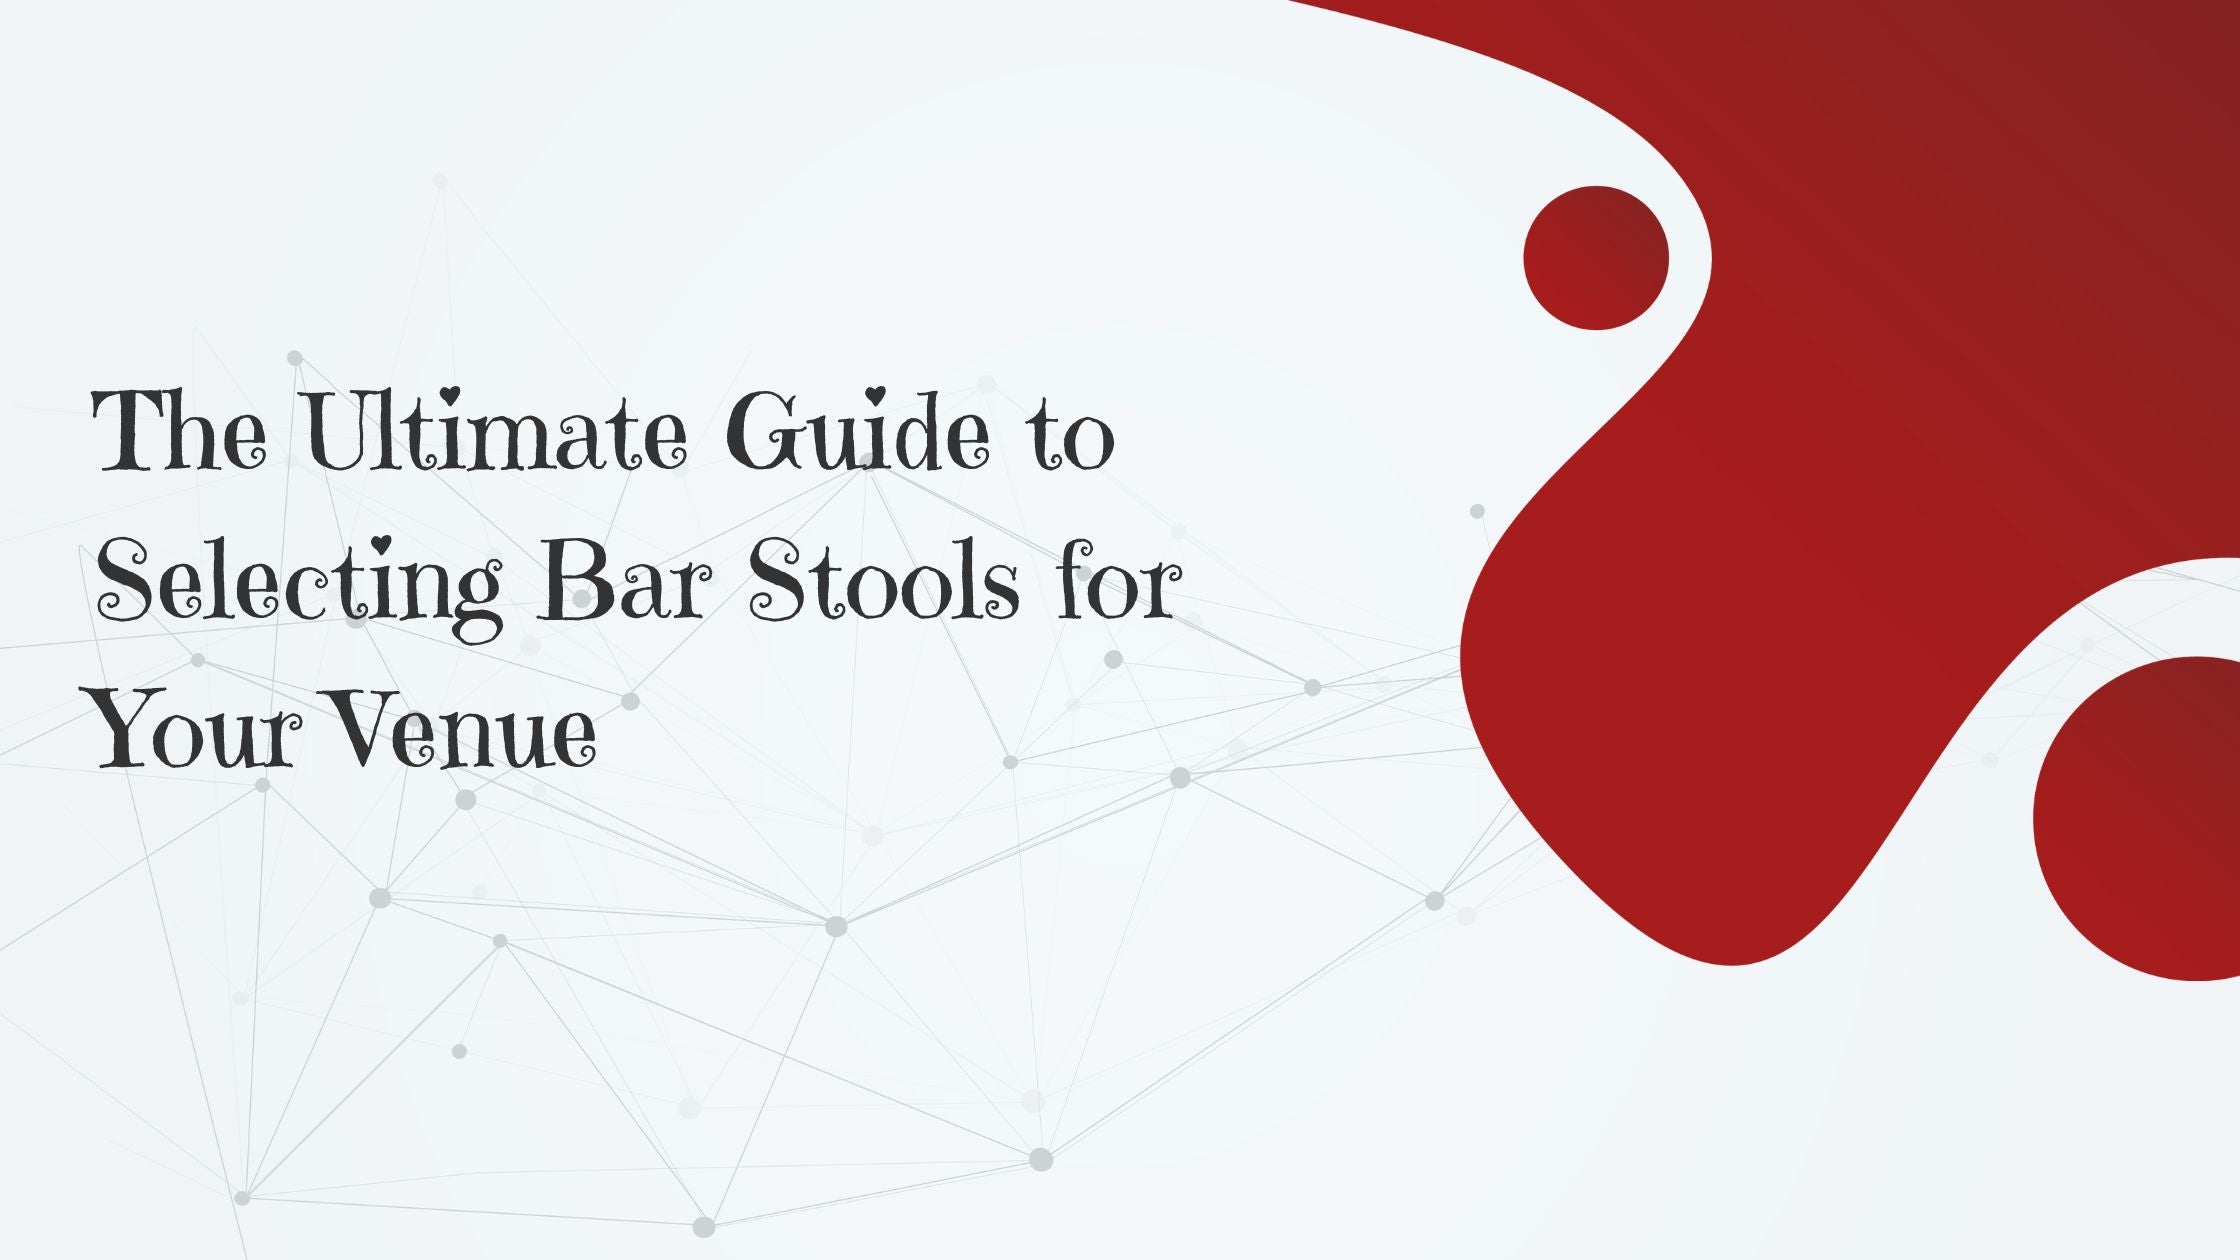 The Ultimate Guide to Selecting Bar Stools for Your Venue